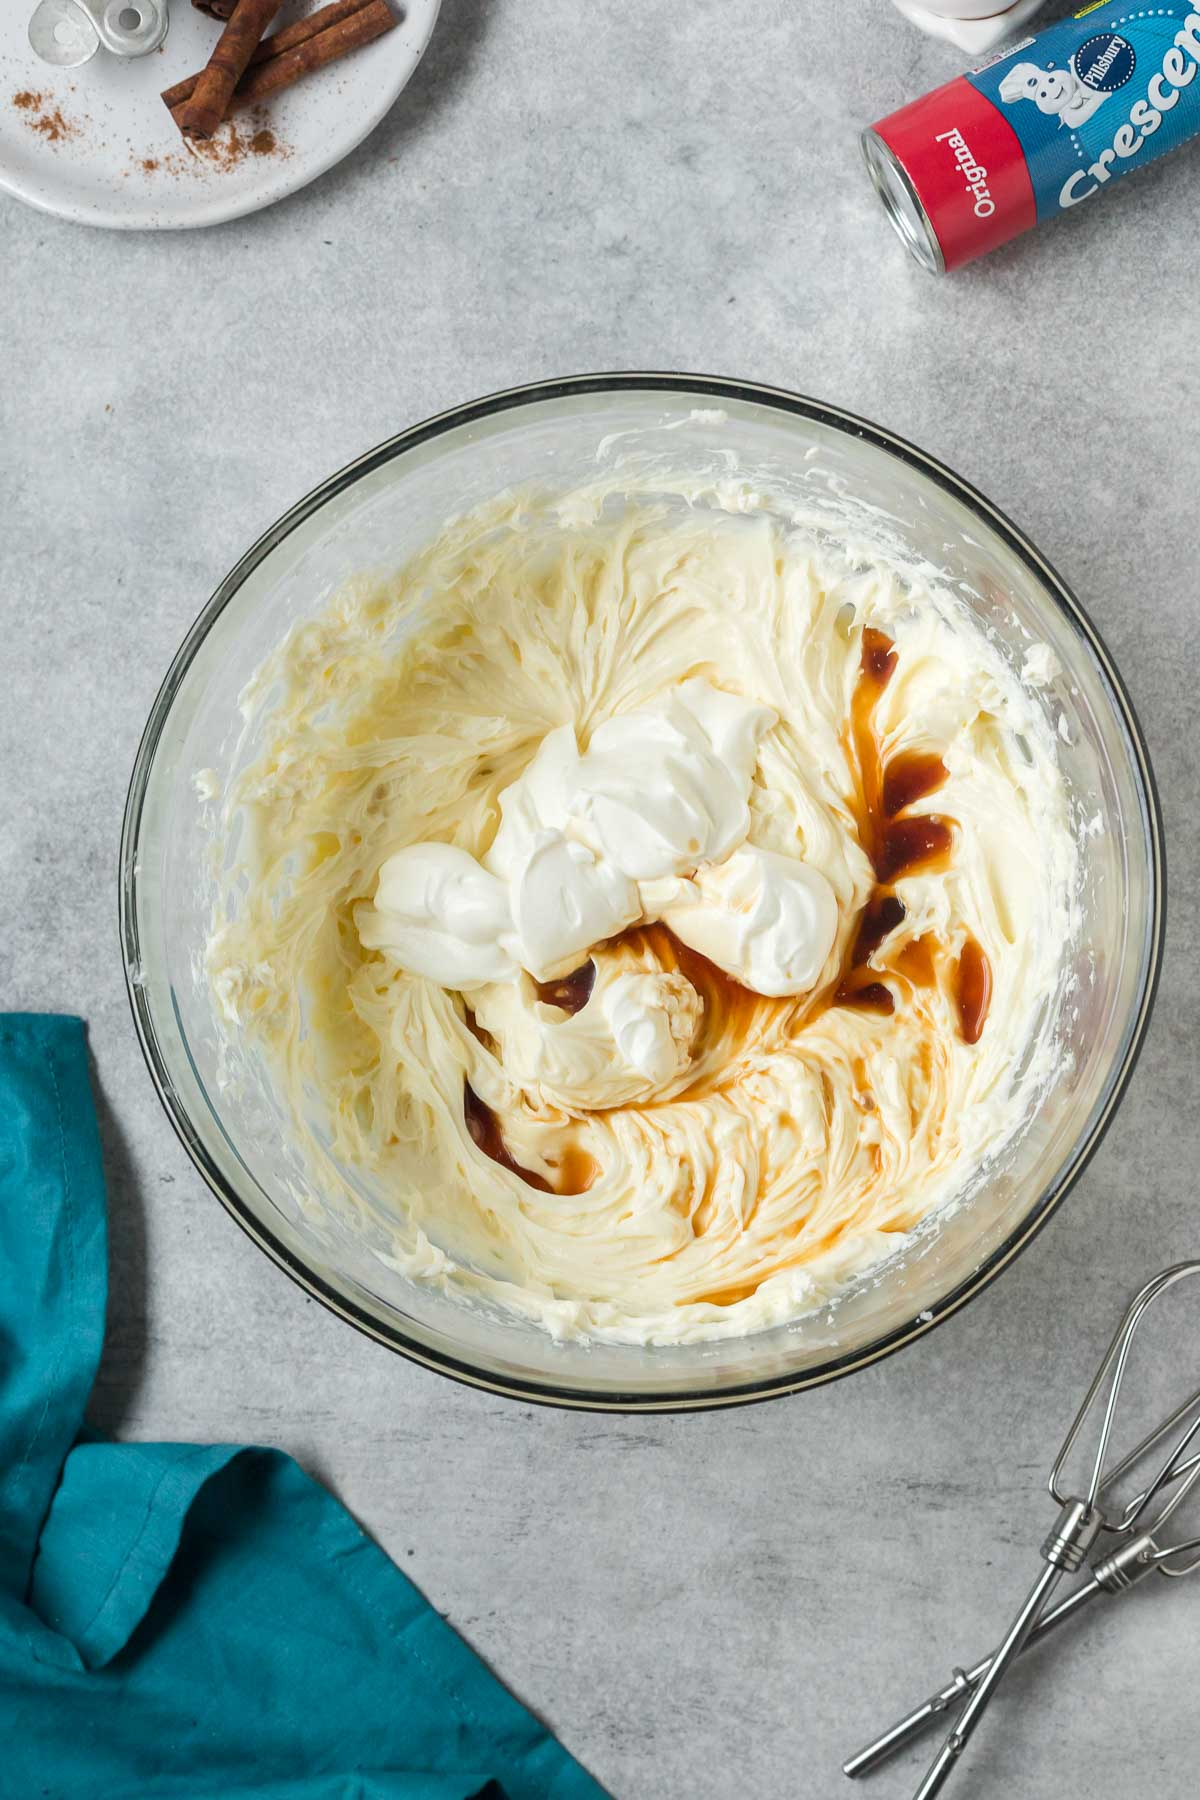 sour cream and vanilla added to cheesecake batter in bowl